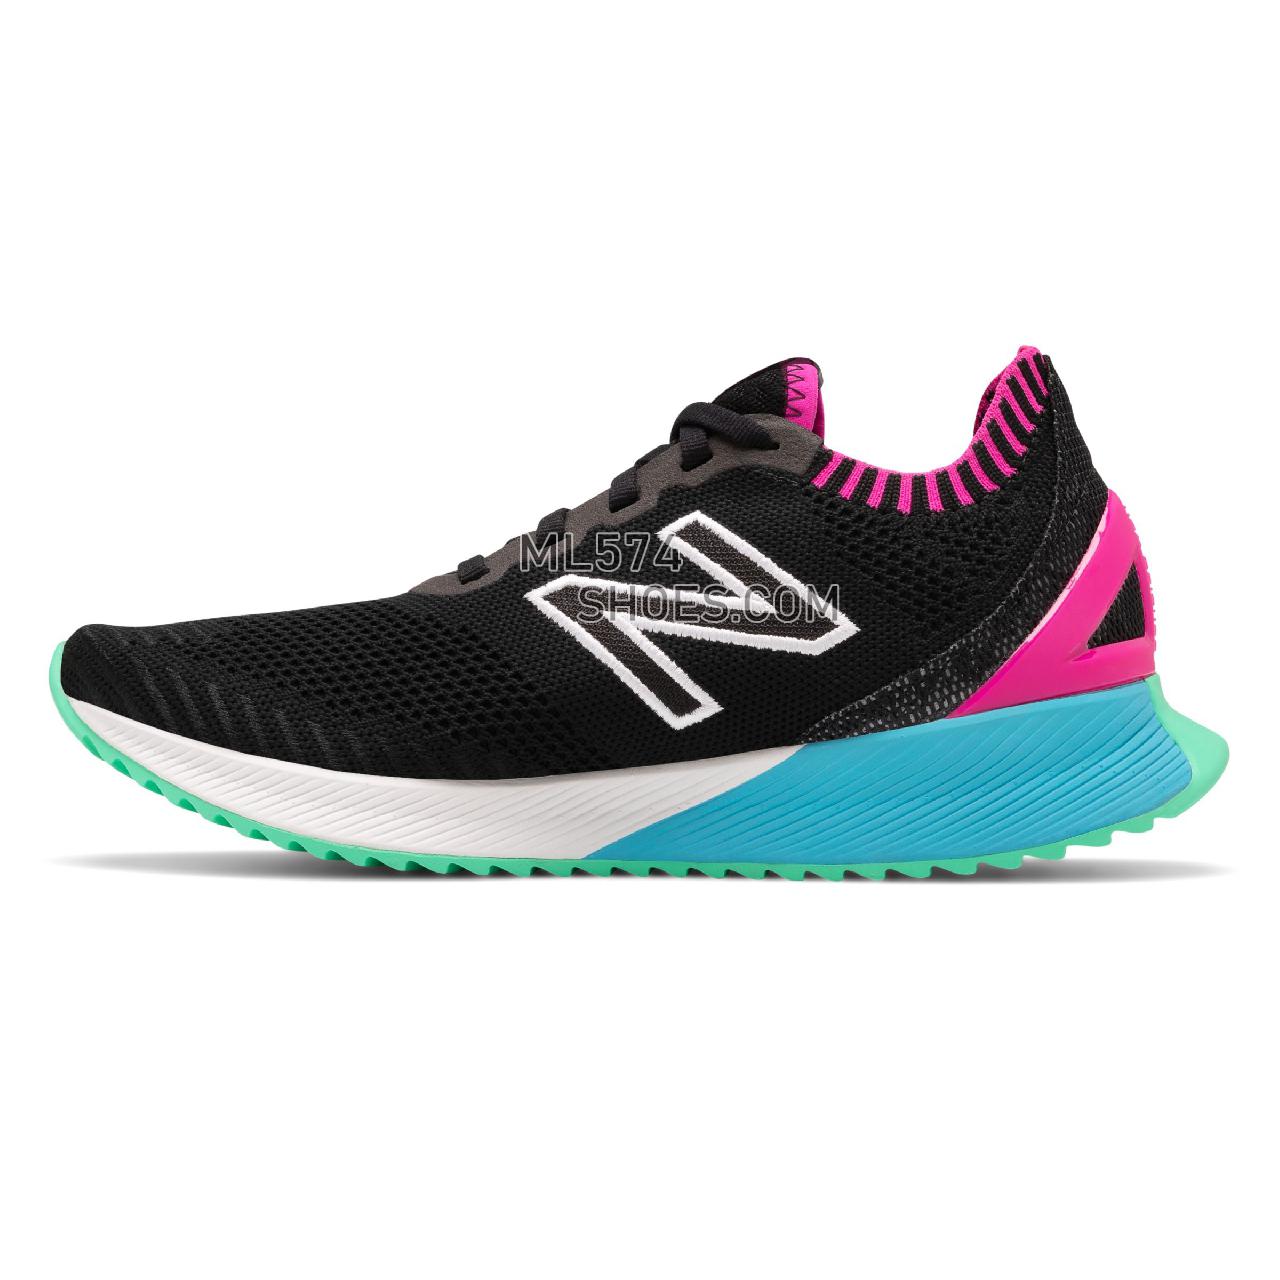 New Balance FuelCell Echo - Women's Neutral Running - Black with Peony and Bayside - WFCECSB